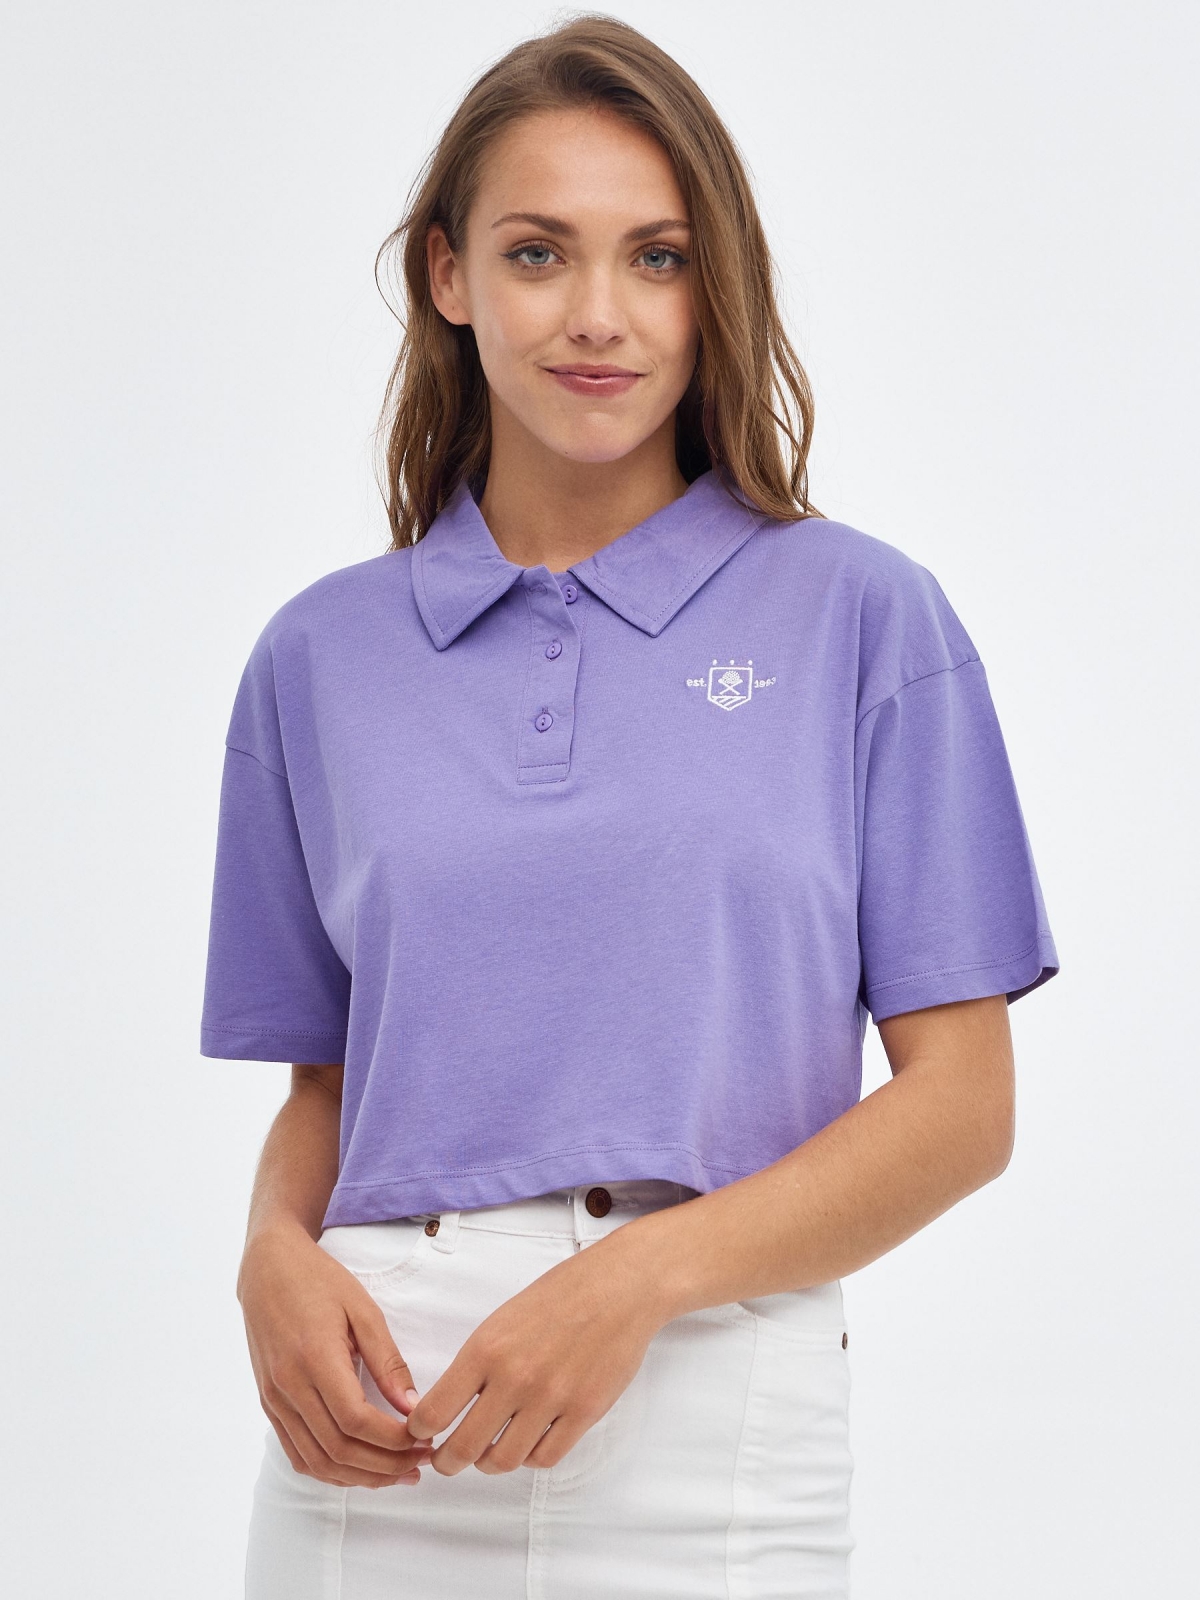 Embroidered polo shirt lilac middle front view